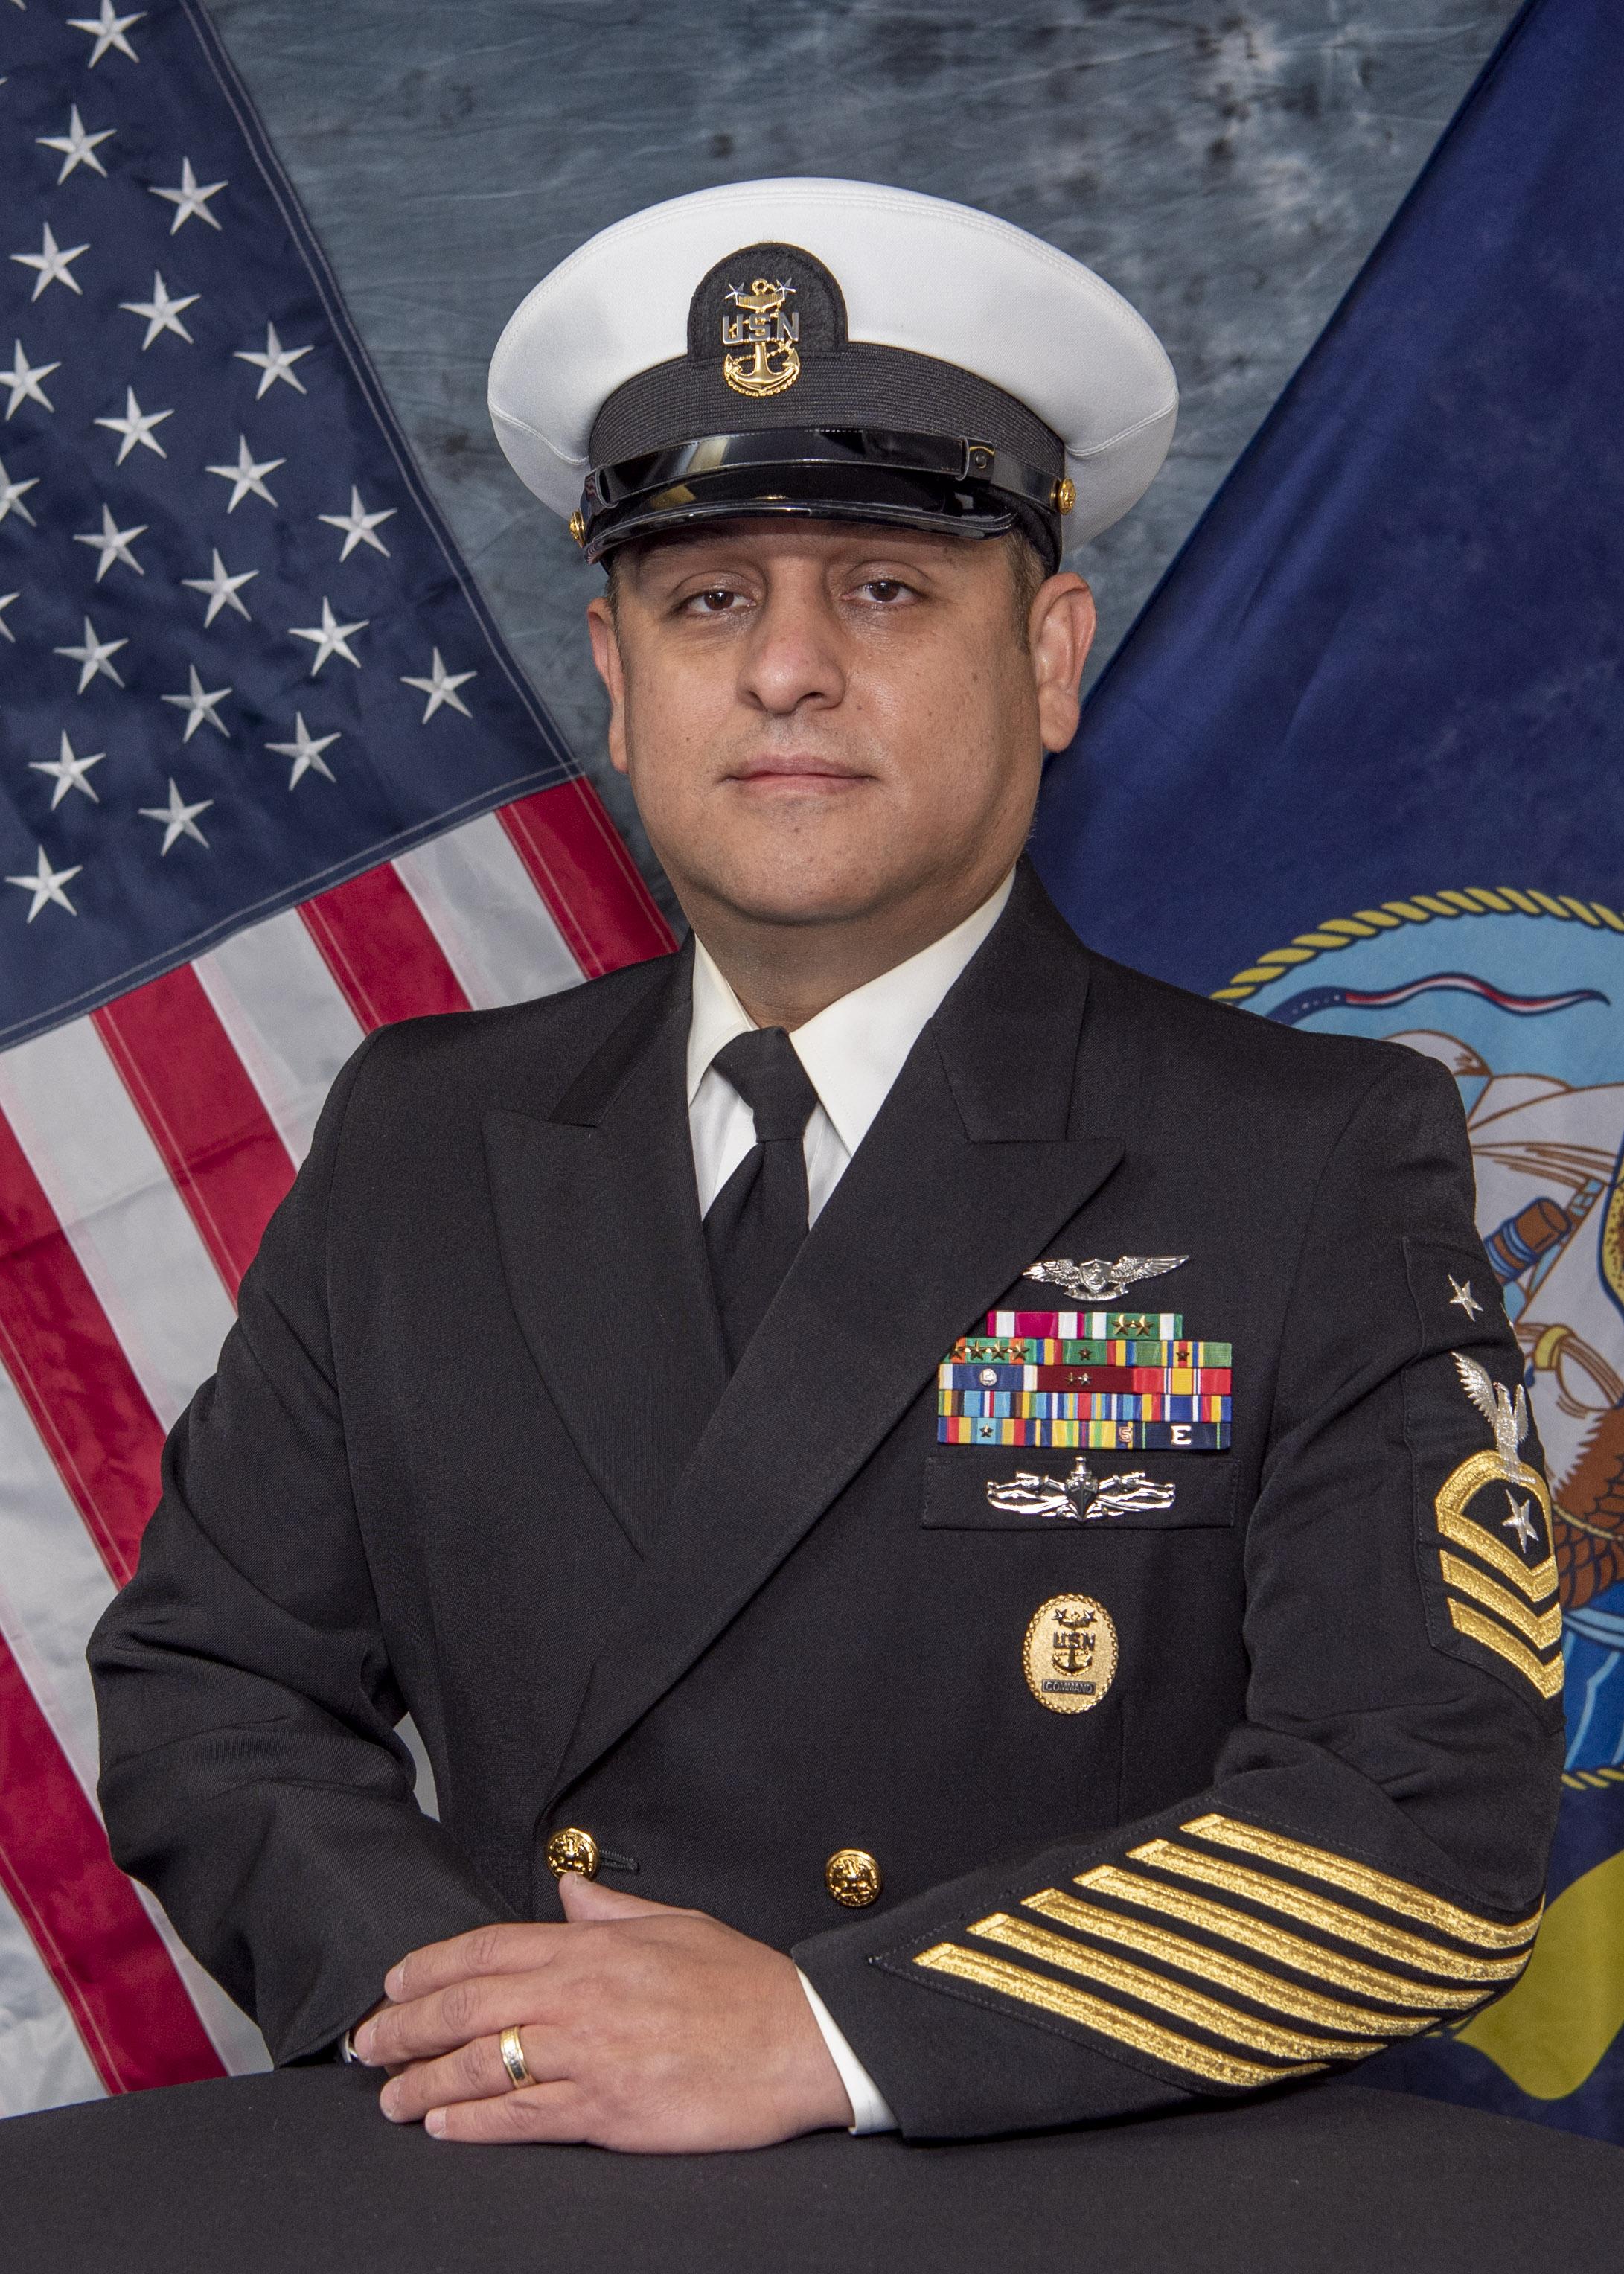 Command master. Navy.mil.